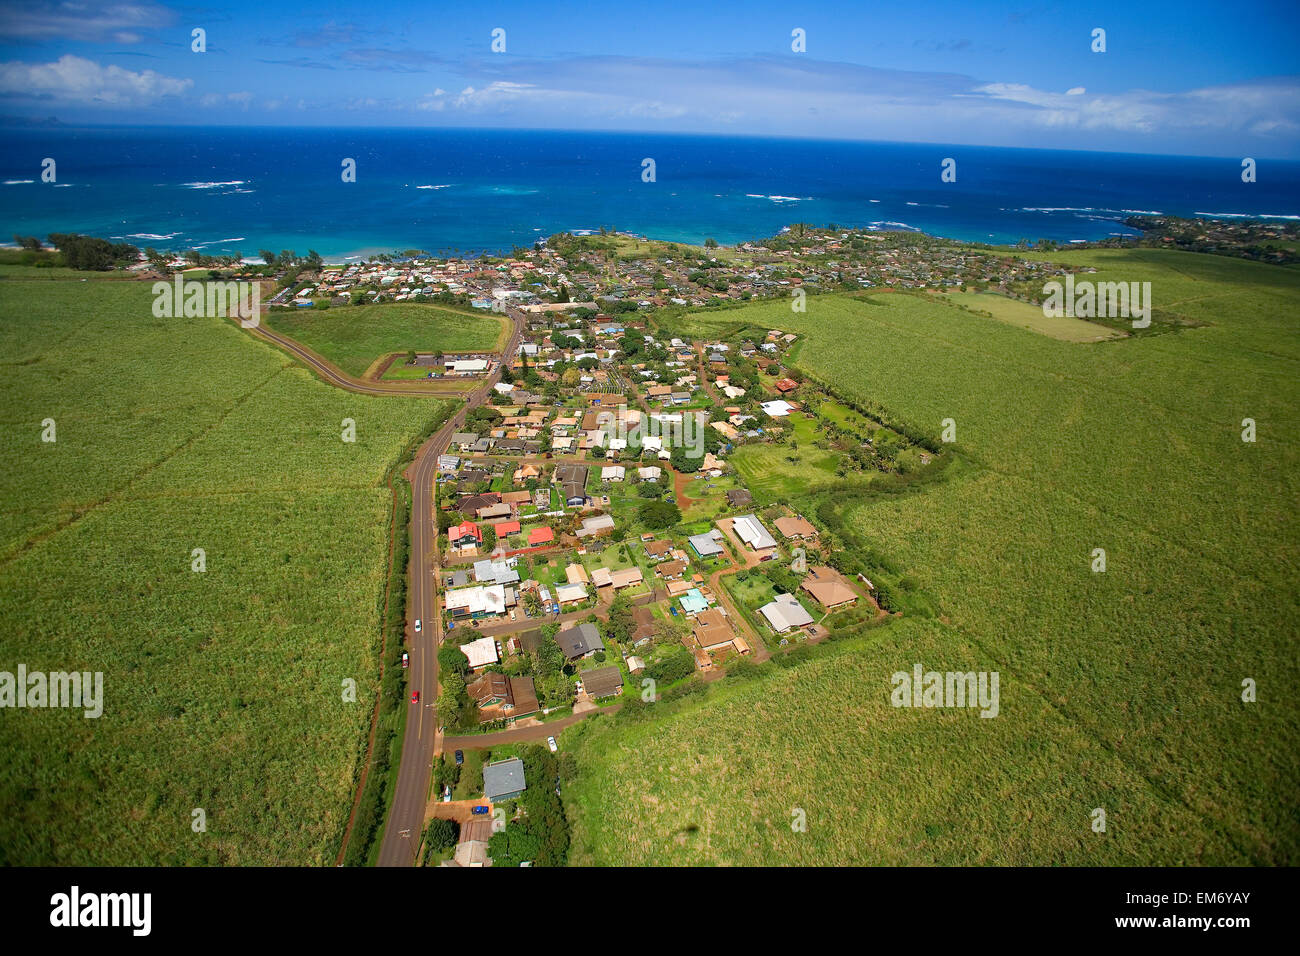 USA, Hawaii, Maui, Aerial view of old plantation town on Maui's north coast of Pacific Ocean; Paia Stock Photo